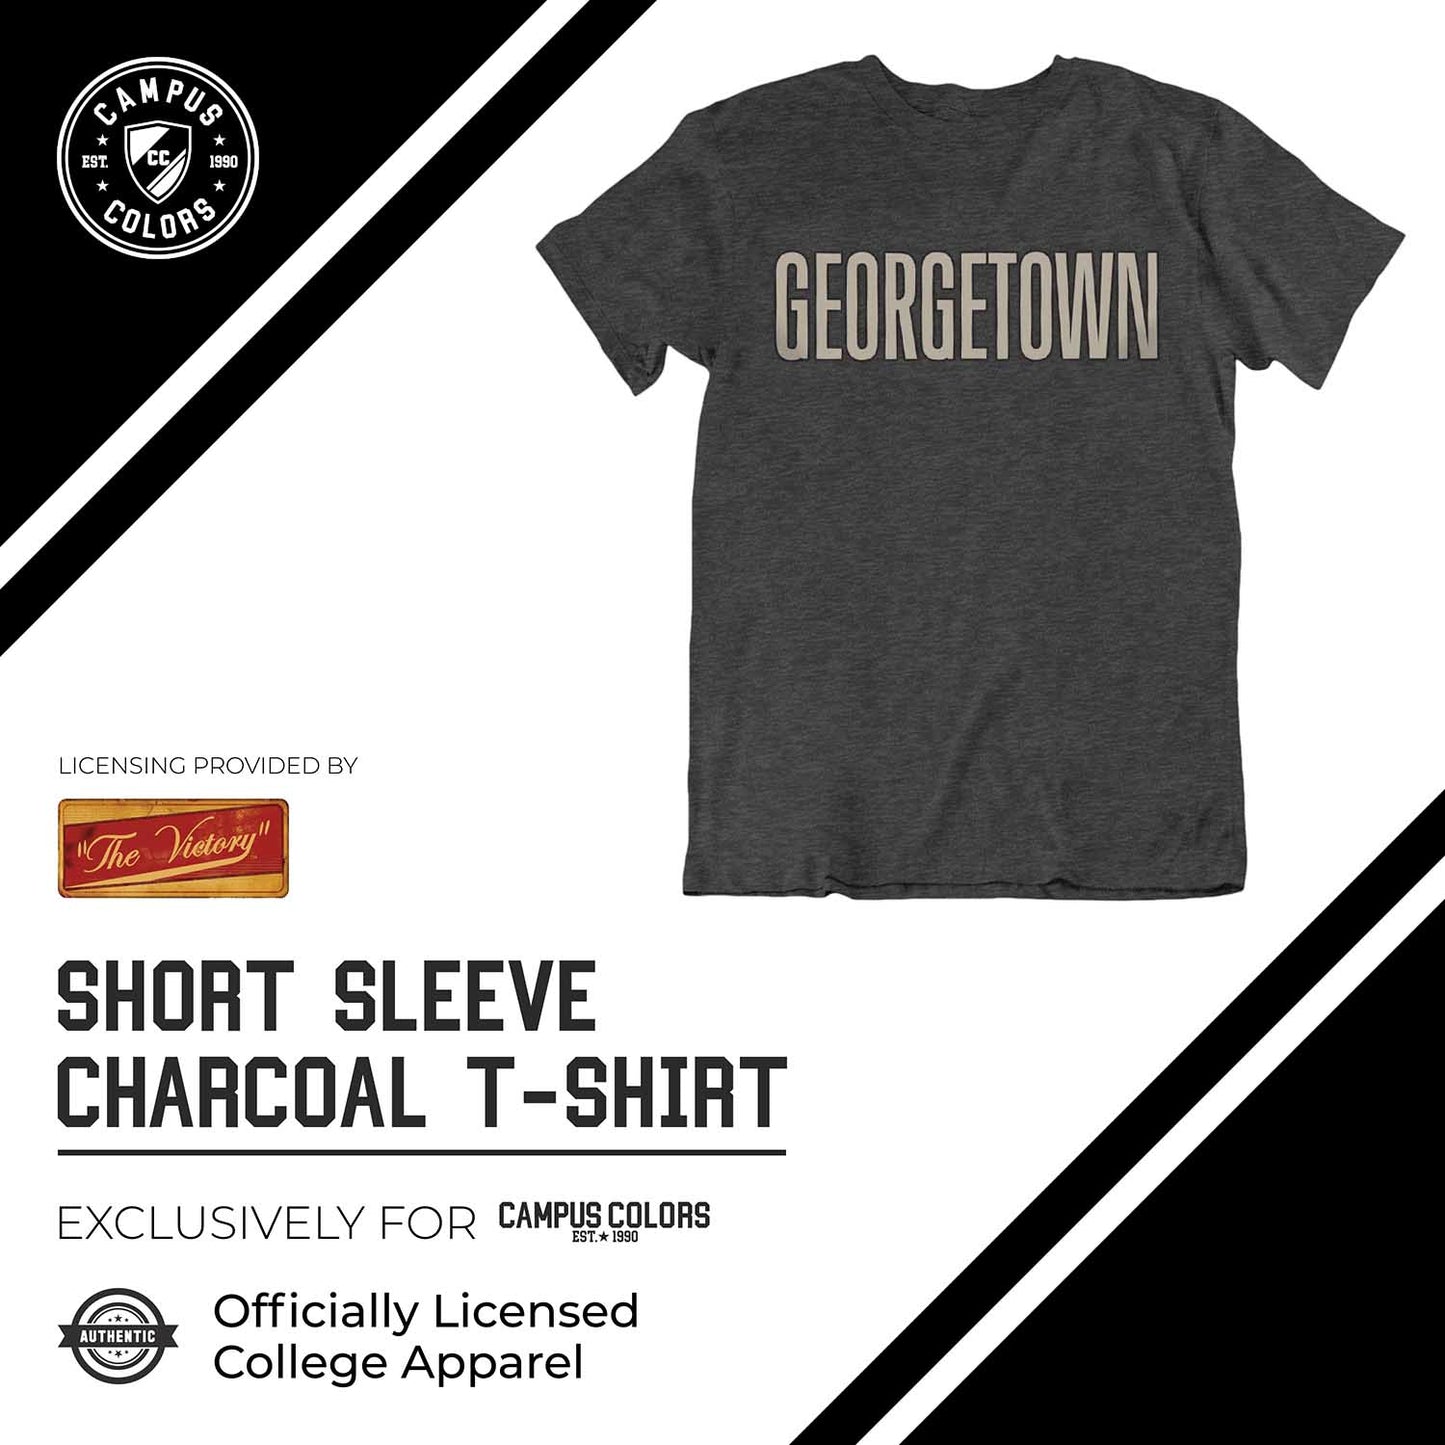 Georgetown Hoyas Campus Colors NCAA Adult Cotton Blend Charcoal Tagless T-Shirt - Charcoal